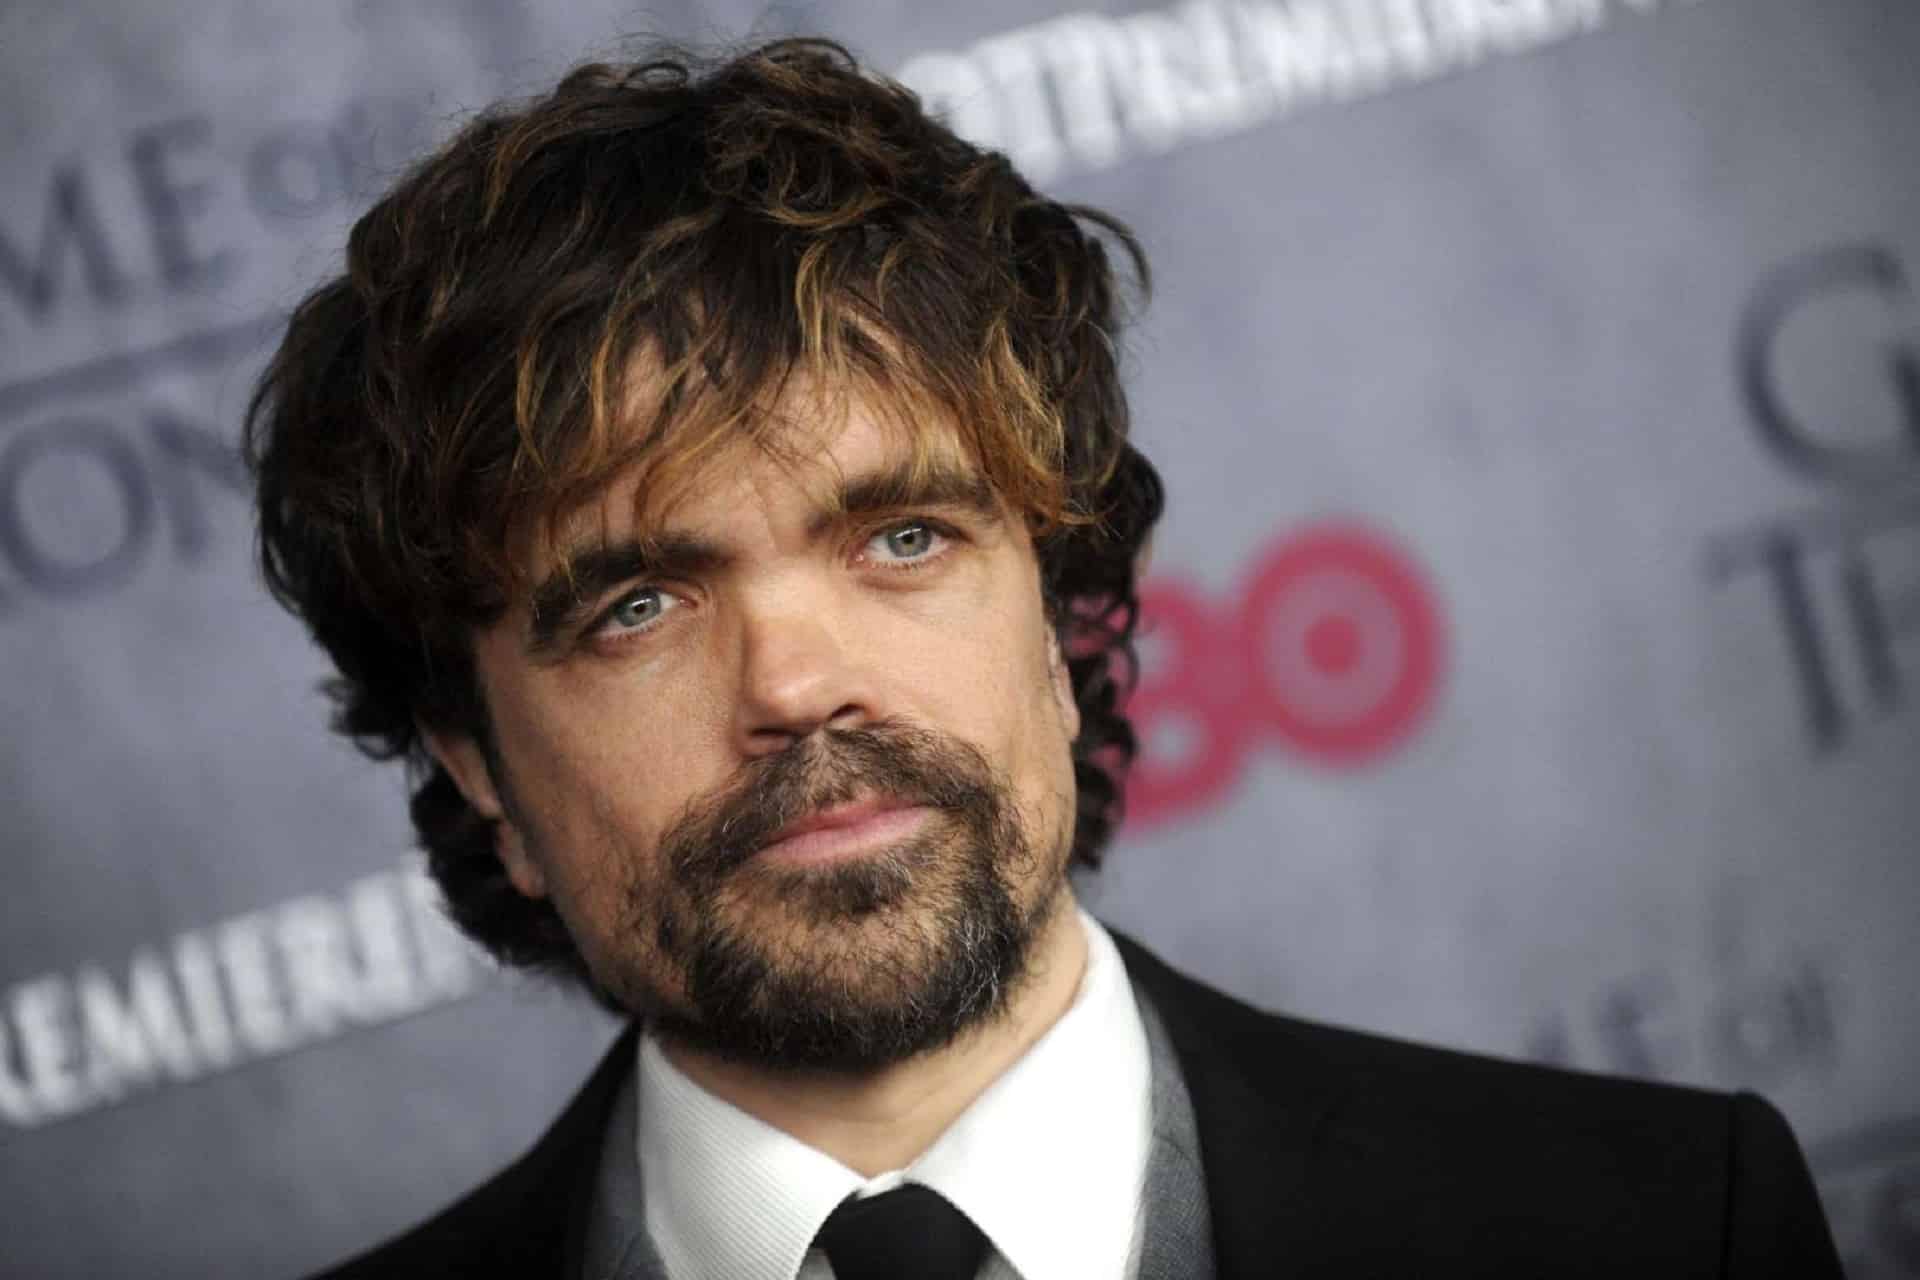 Keith: Peter Dinklage protagonista del thriller di Searchlight